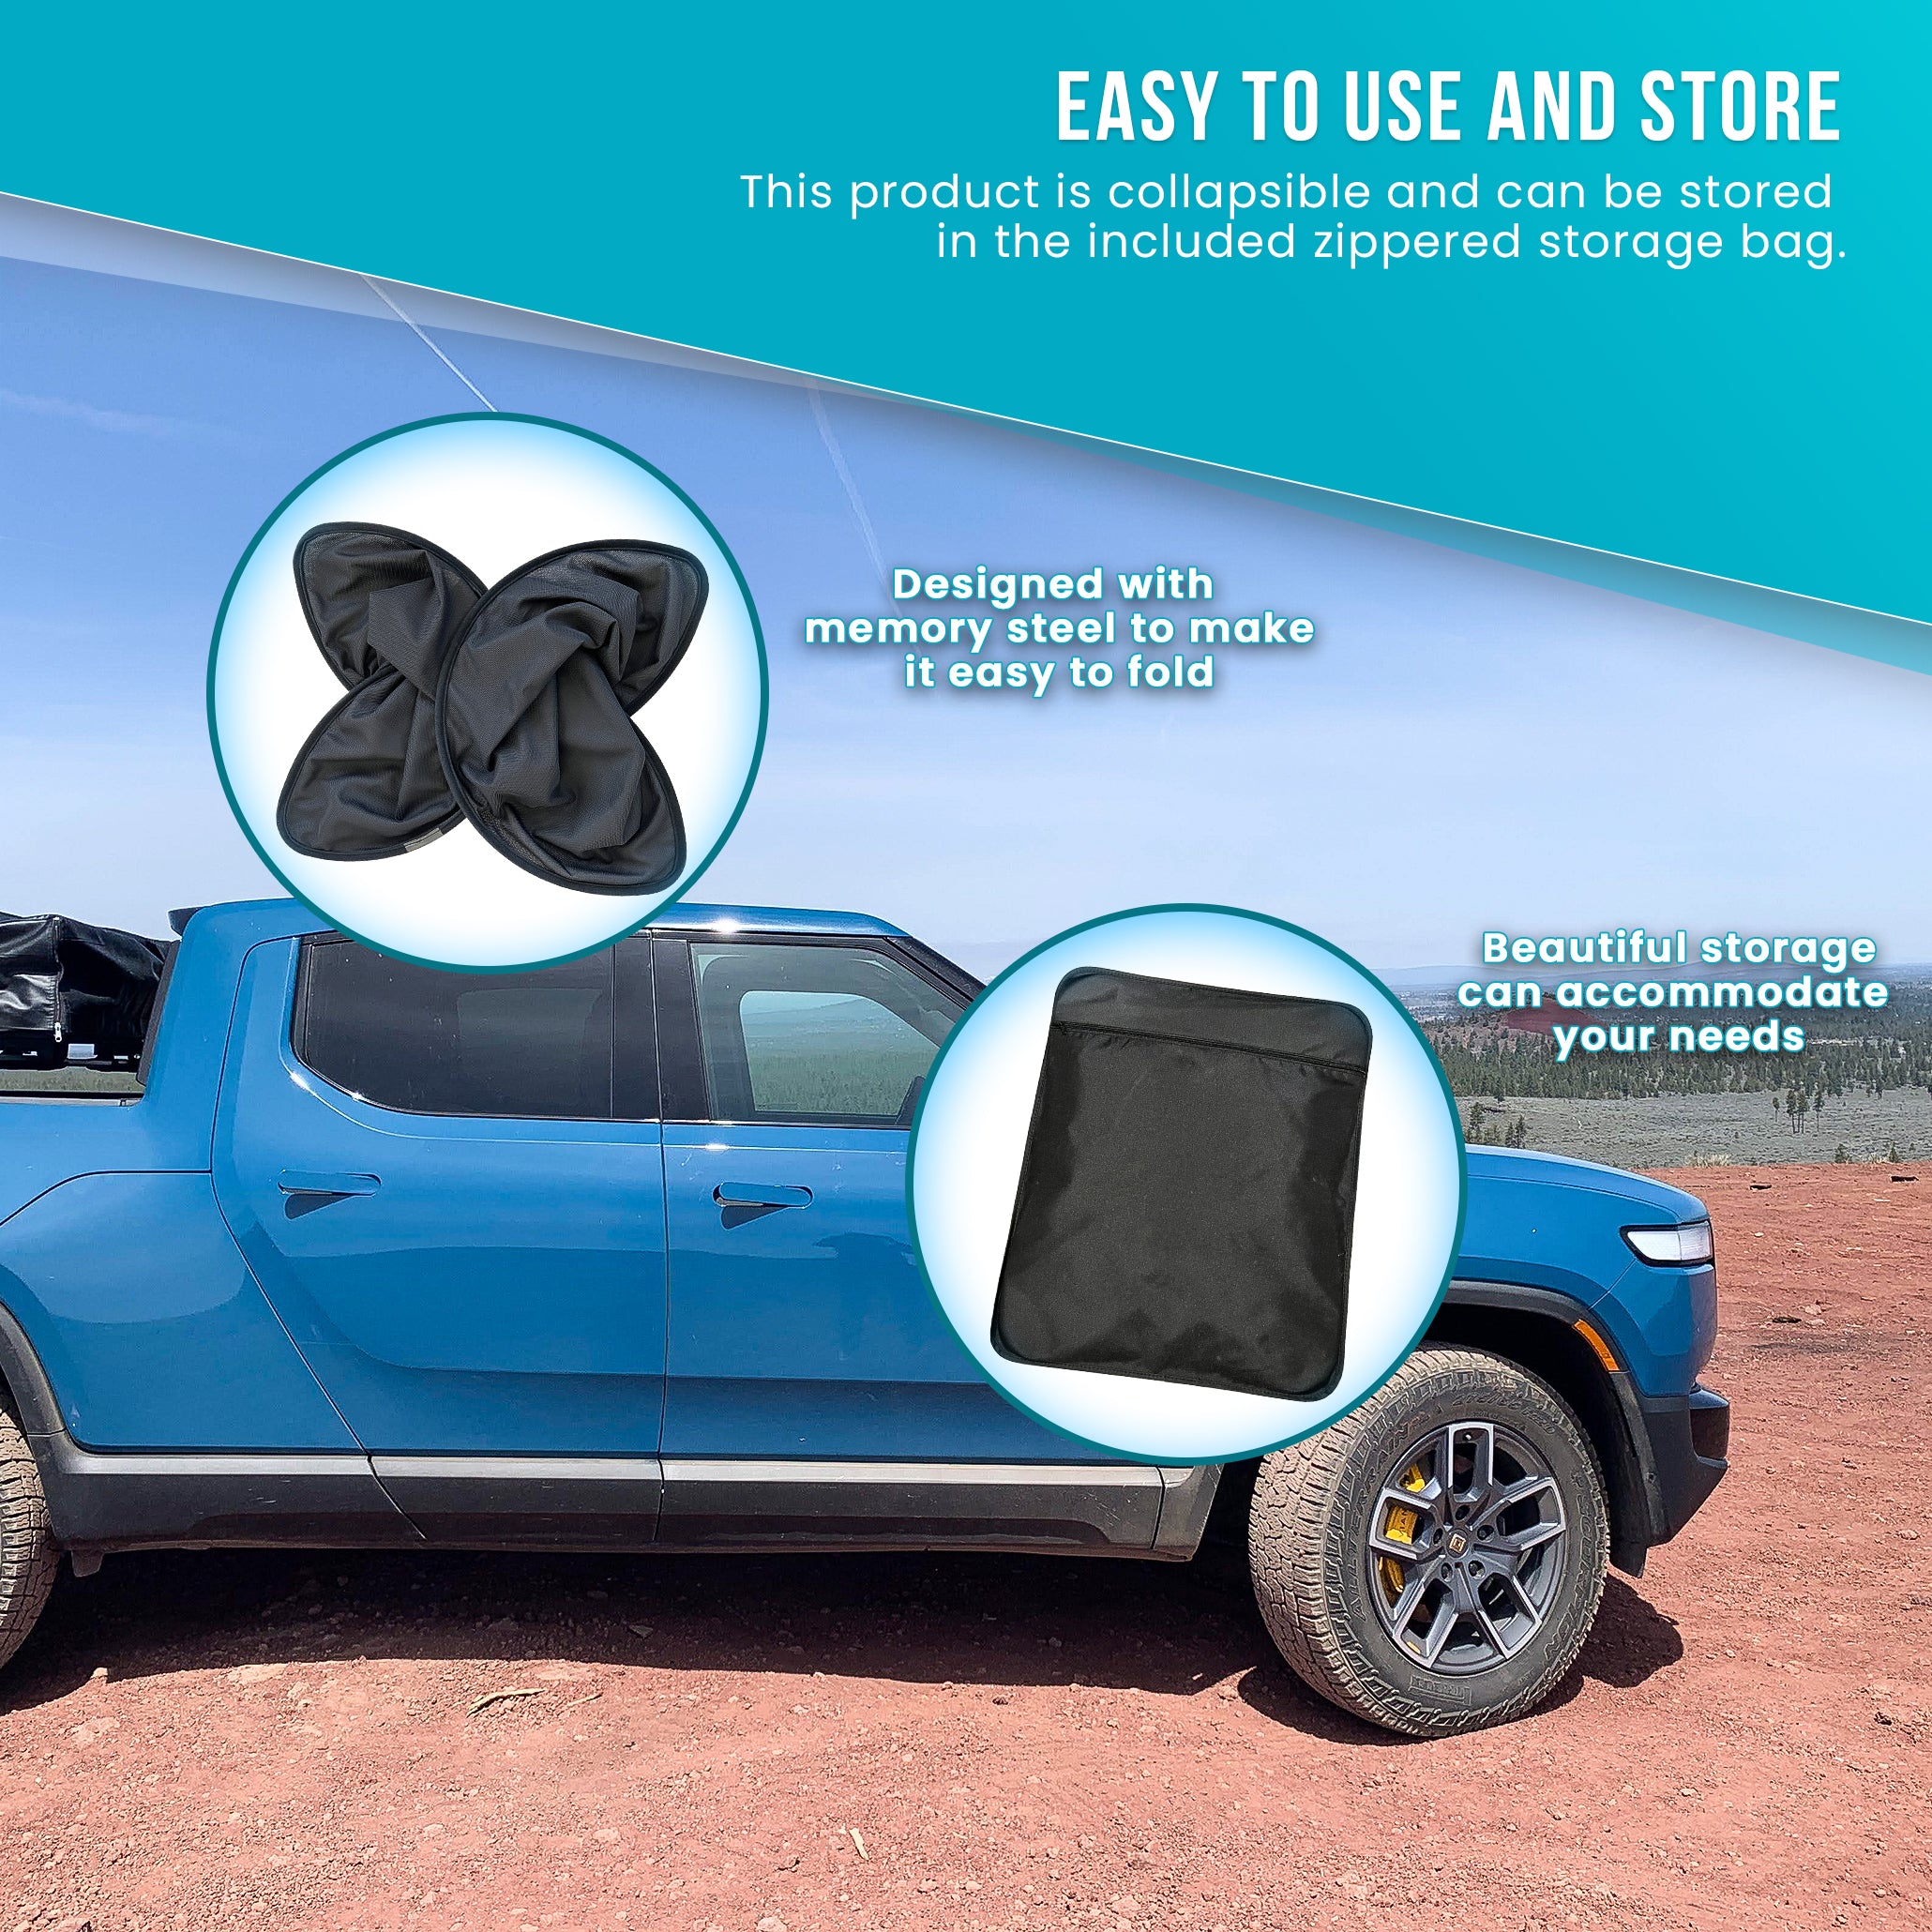 CLEARANCE: Imperfect Pano Roof Shades for Your Rivian R1T